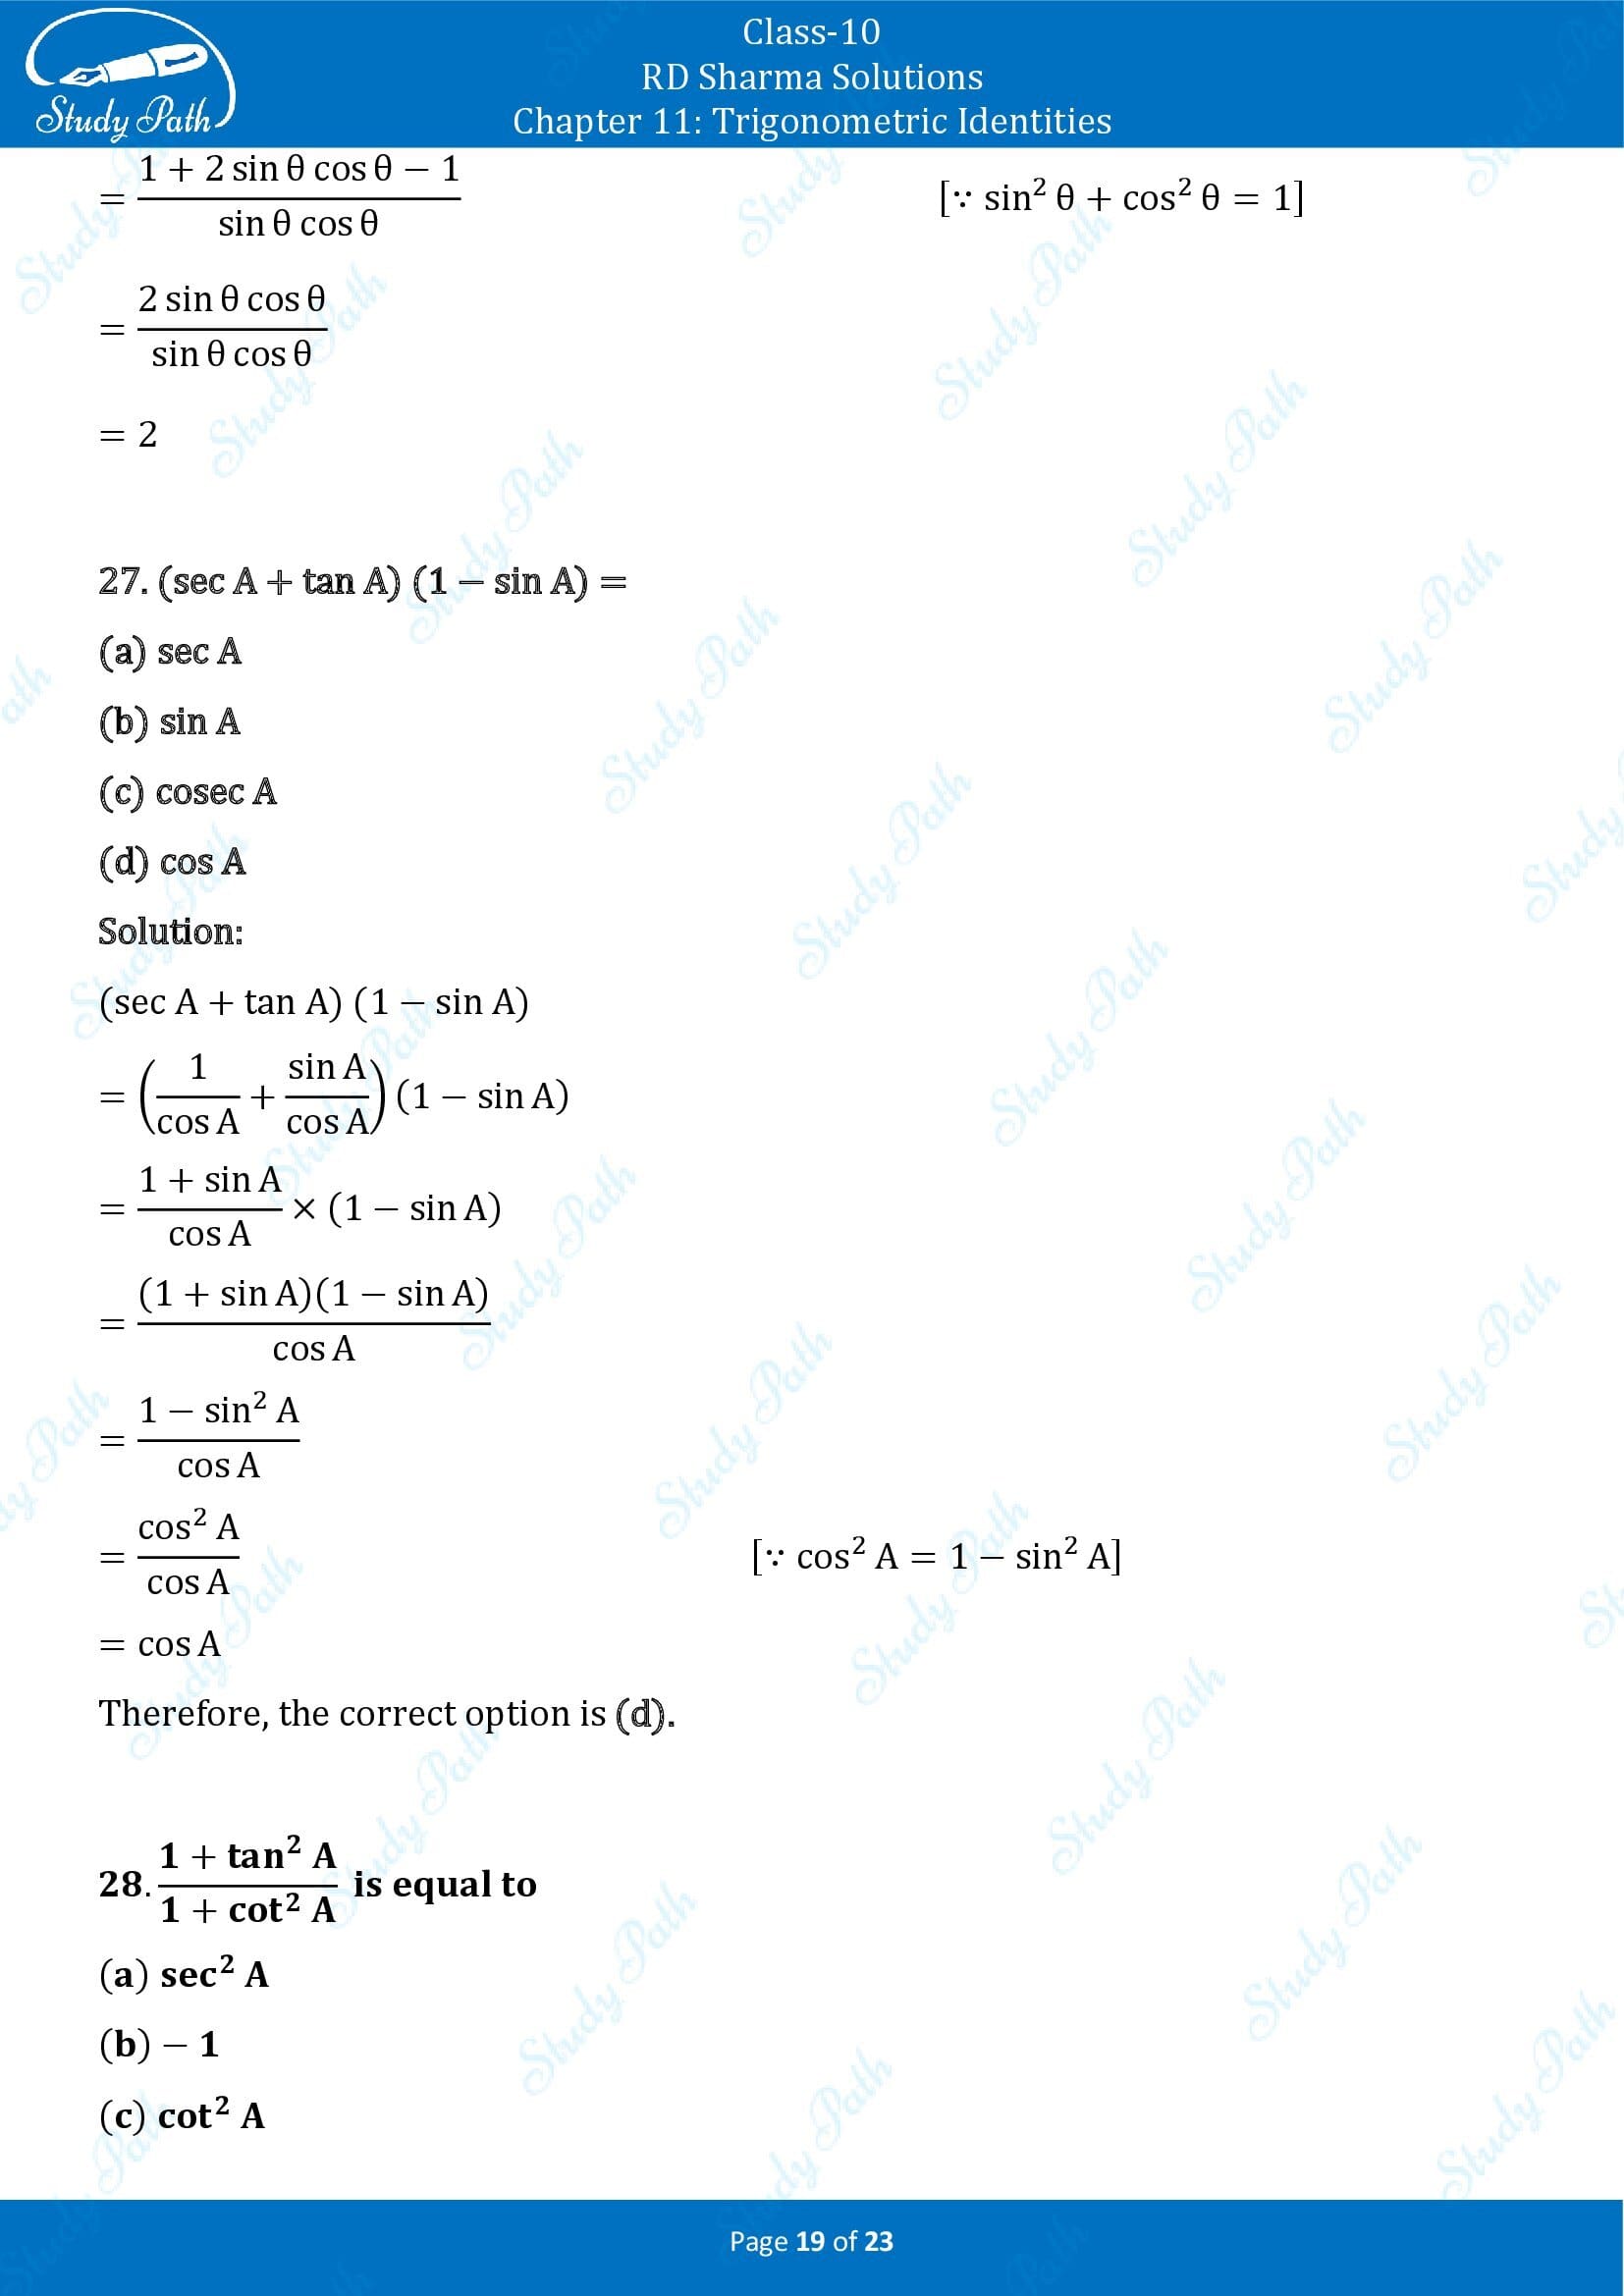 RD Sharma Solutions Class 10 Chapter 11 Trigonometric Identities Multiple Choice Questions MCQs 00019